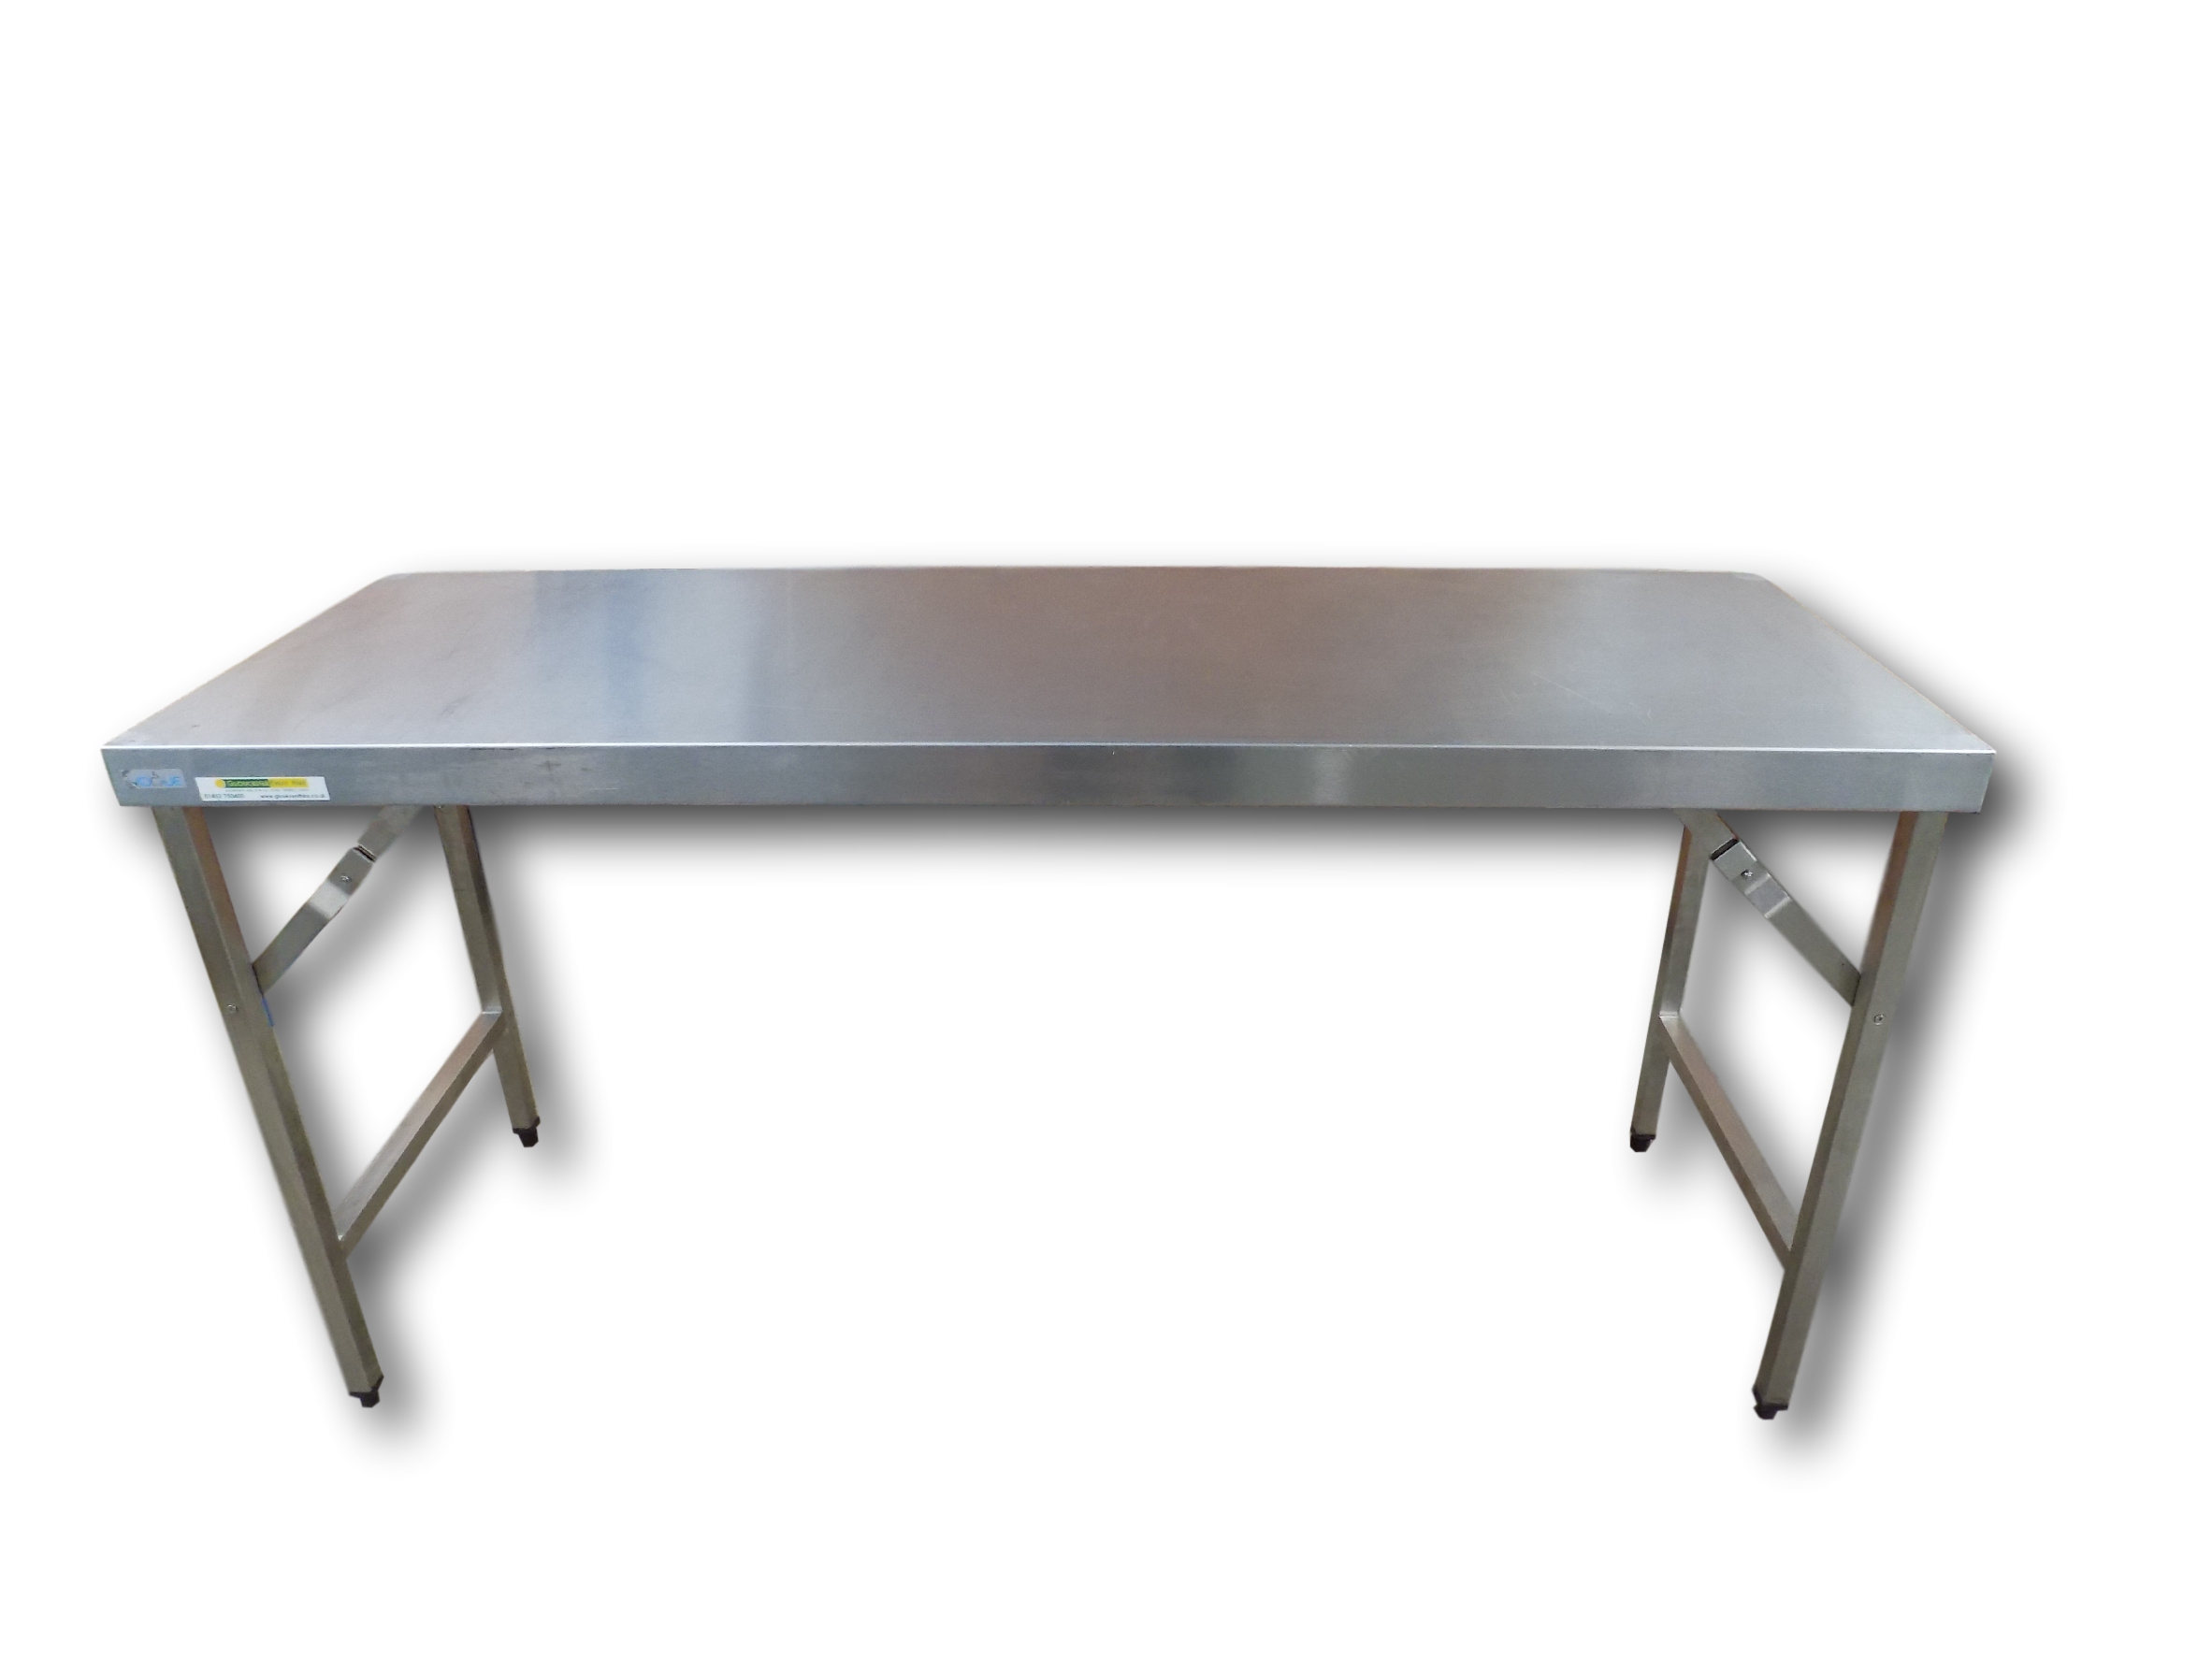 Gloucester Event Hire - 1800mm Stainless Steel Prep. Table. Folding Legs Folding Stainless Steel Prep Table